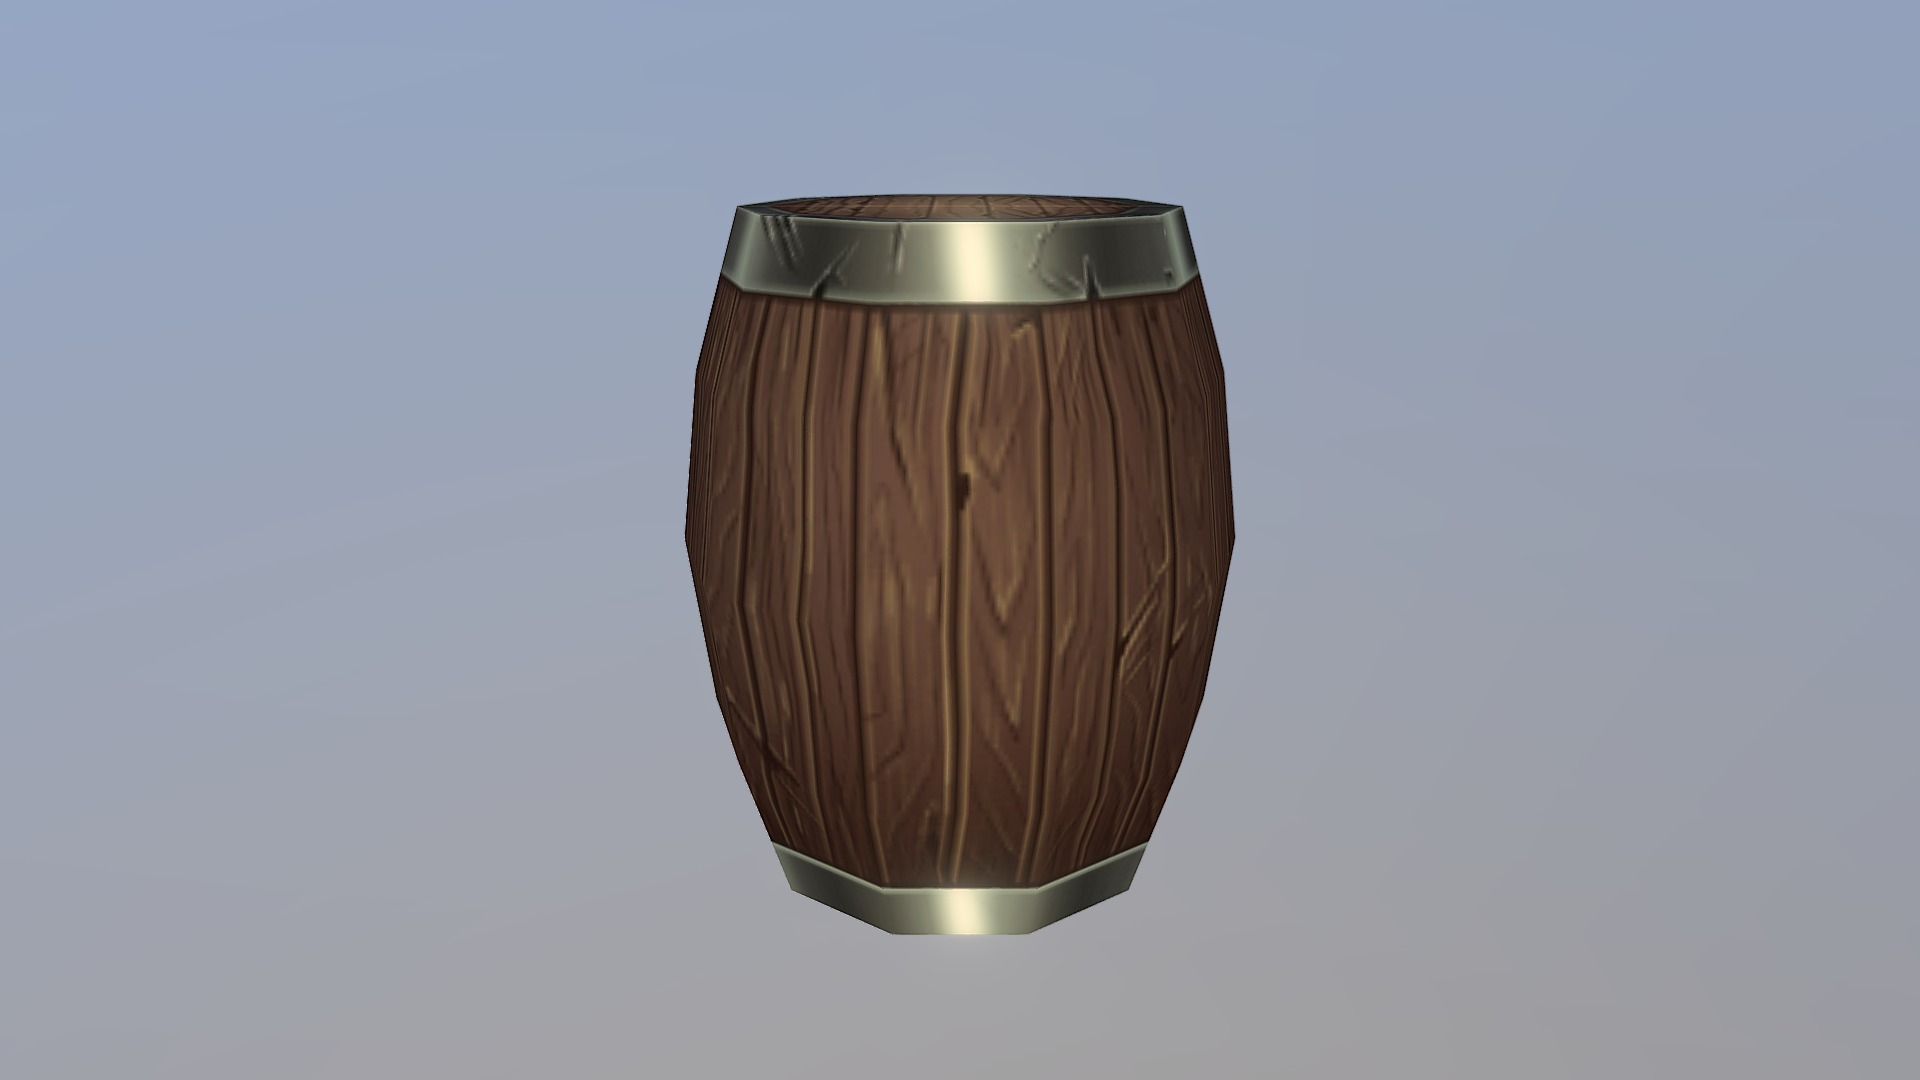 3D model Wood Barrel - This is a 3D model of the Wood Barrel. The 3D model is about a brown cylindrical container.